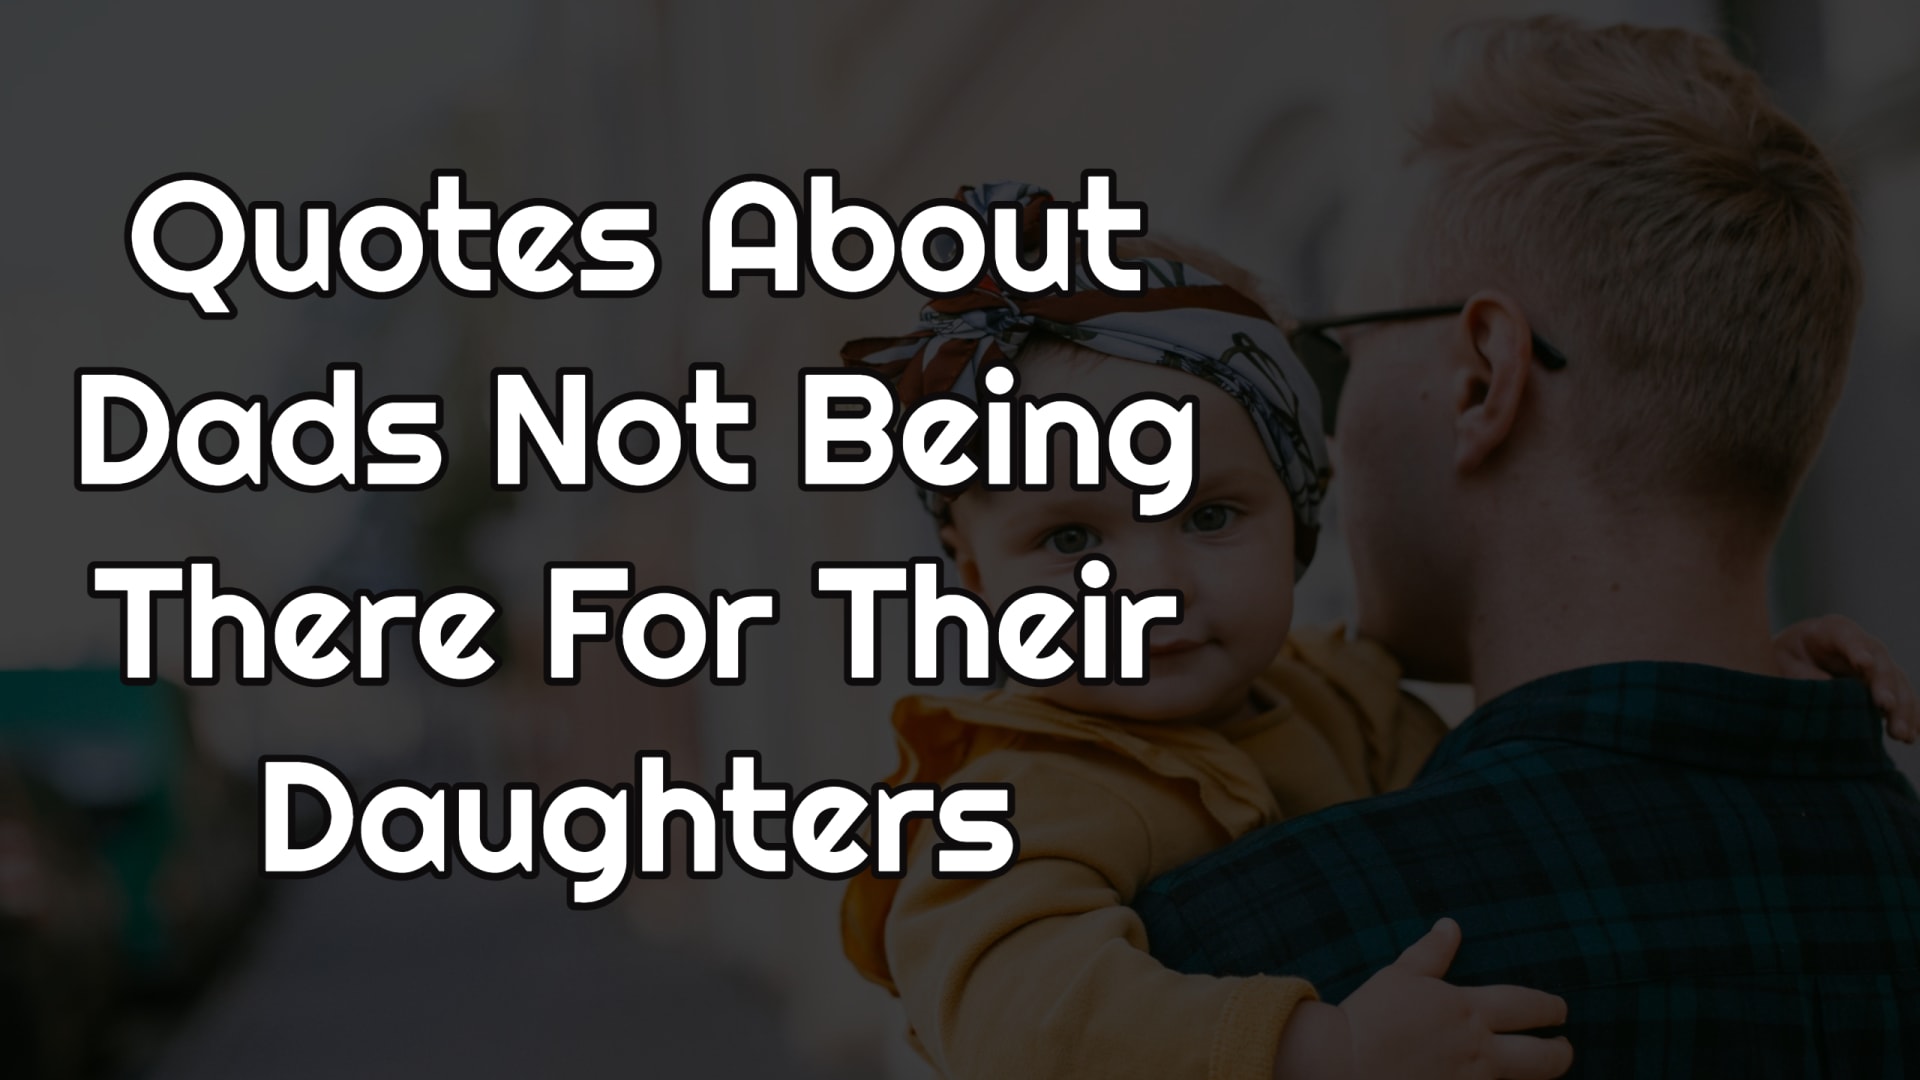 Quotes About Dads Not Being There For Their Daughters